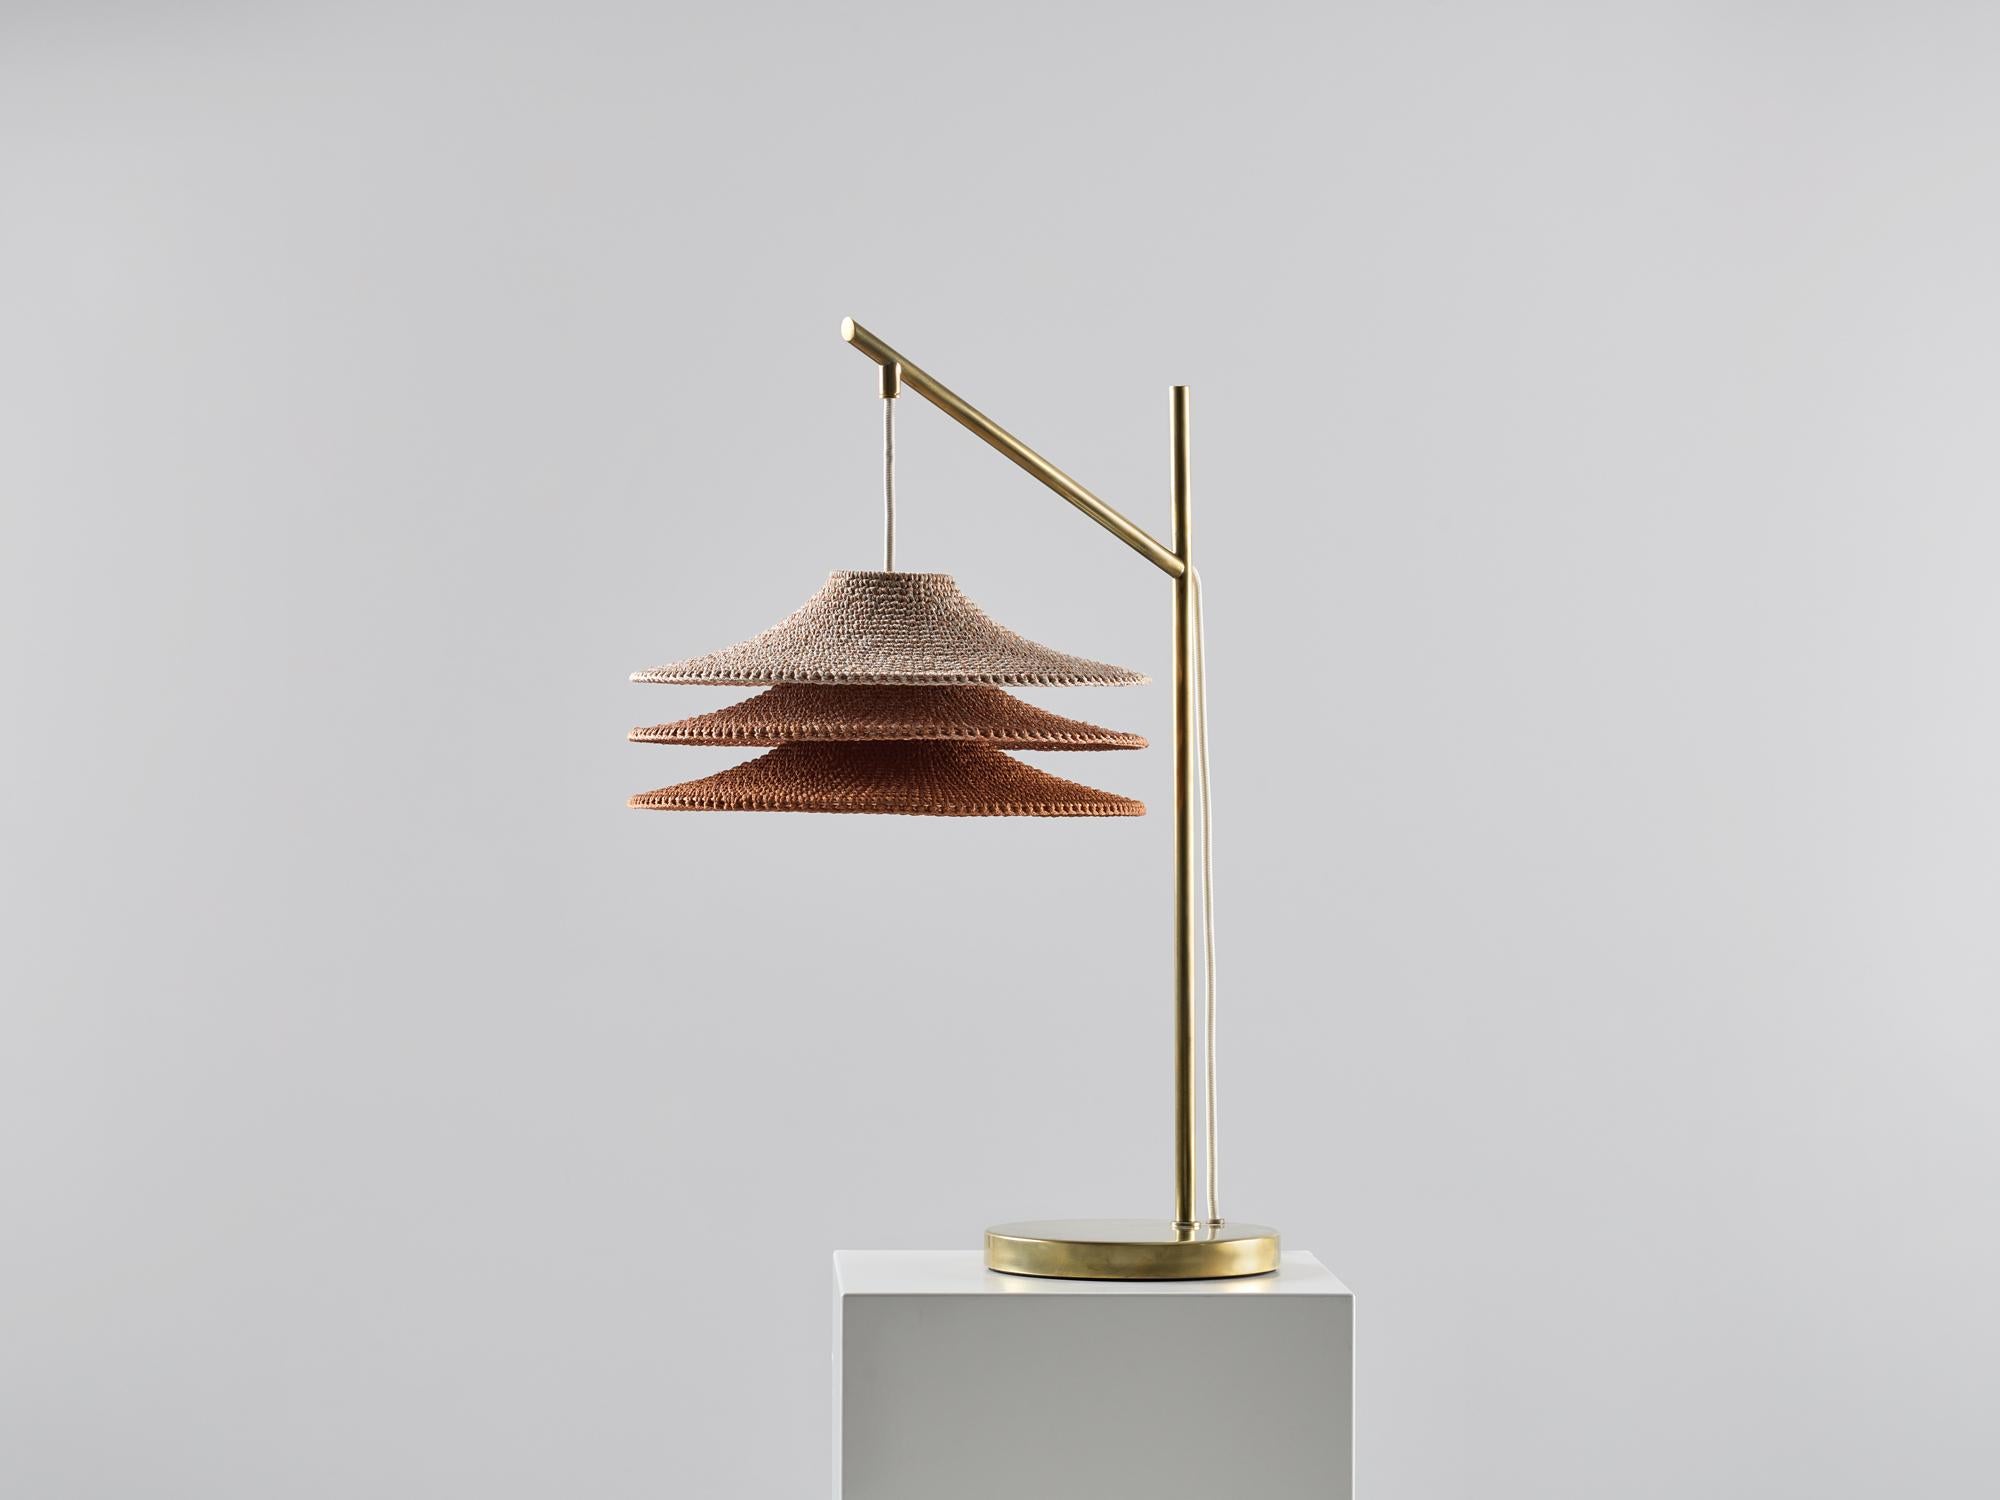 Simple shade 03 table lamp by Naomi Paul
Dimensions: D 30 x W 43 x H 57 cm
Materials: Metal frame, Egyptian cotton cord.
Colors: Ombré finish in Ecru and Rust.
Available in other colors.
Available in plain, 50/50, trim or ombré color